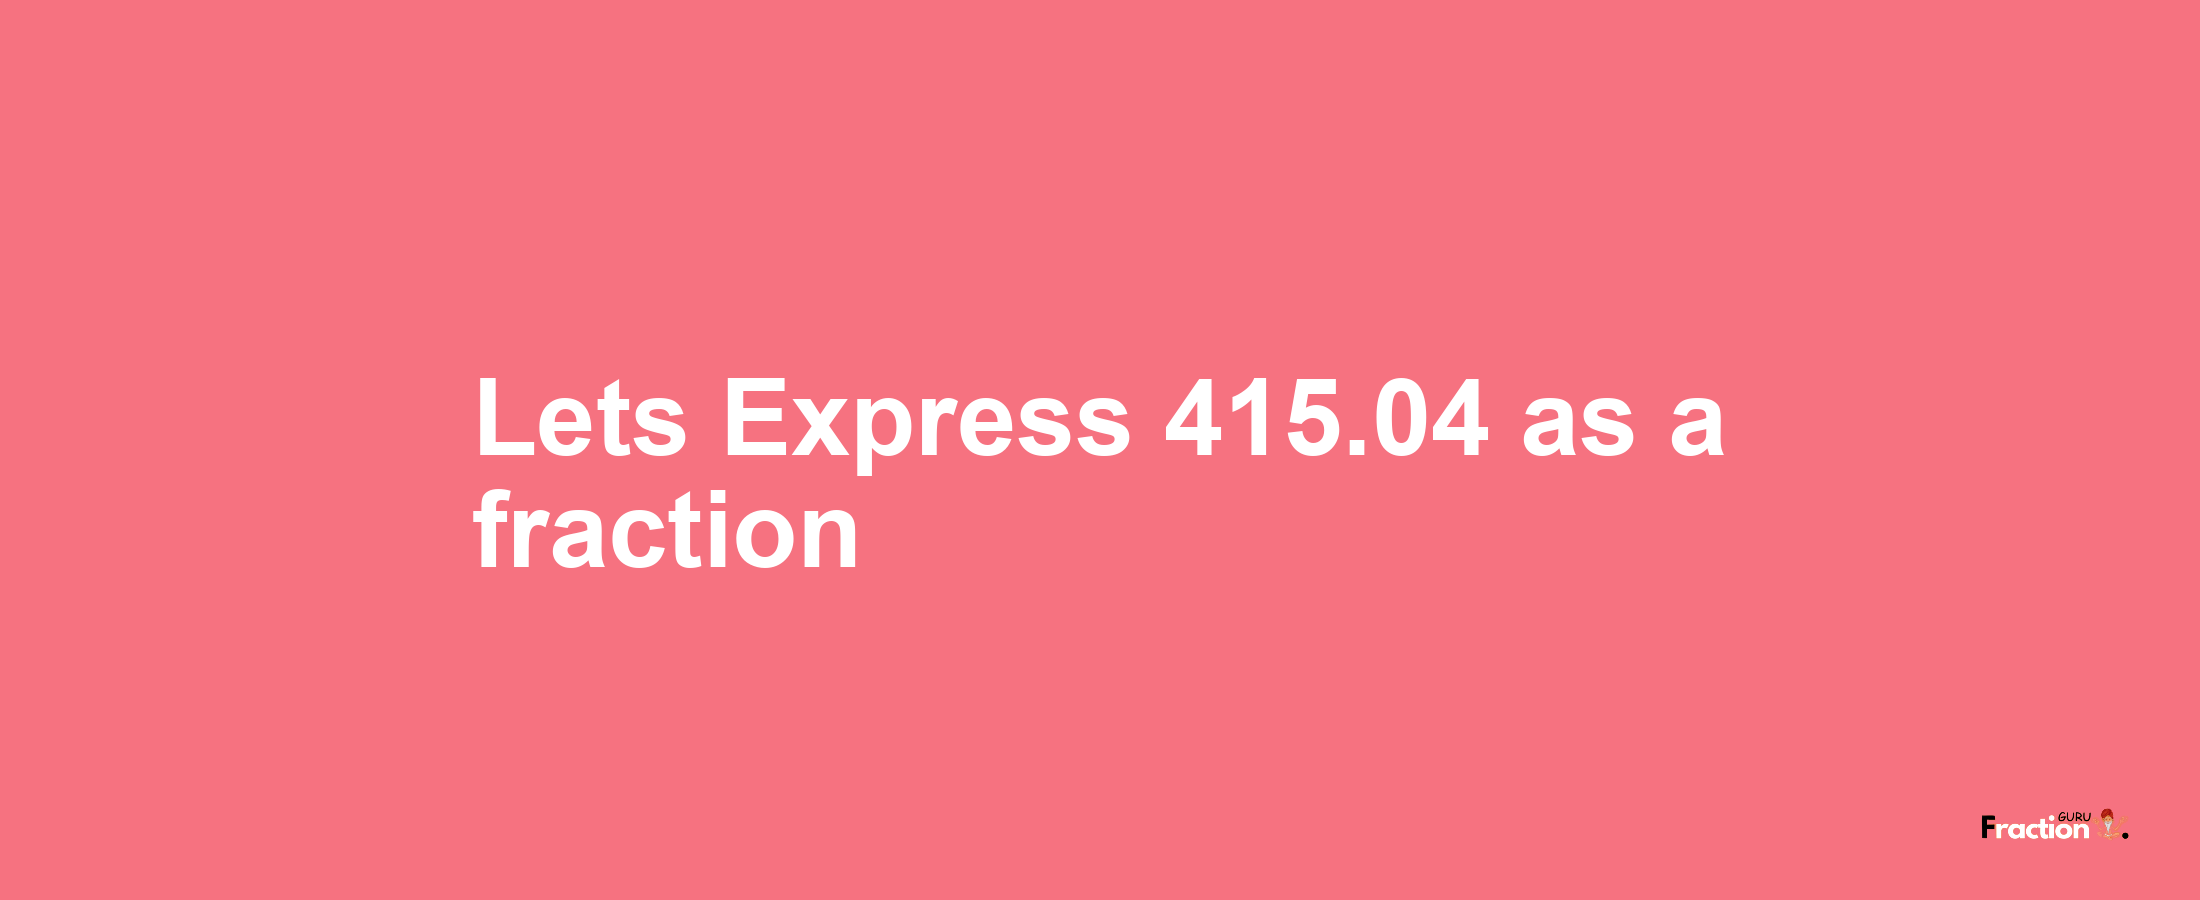 Lets Express 415.04 as afraction